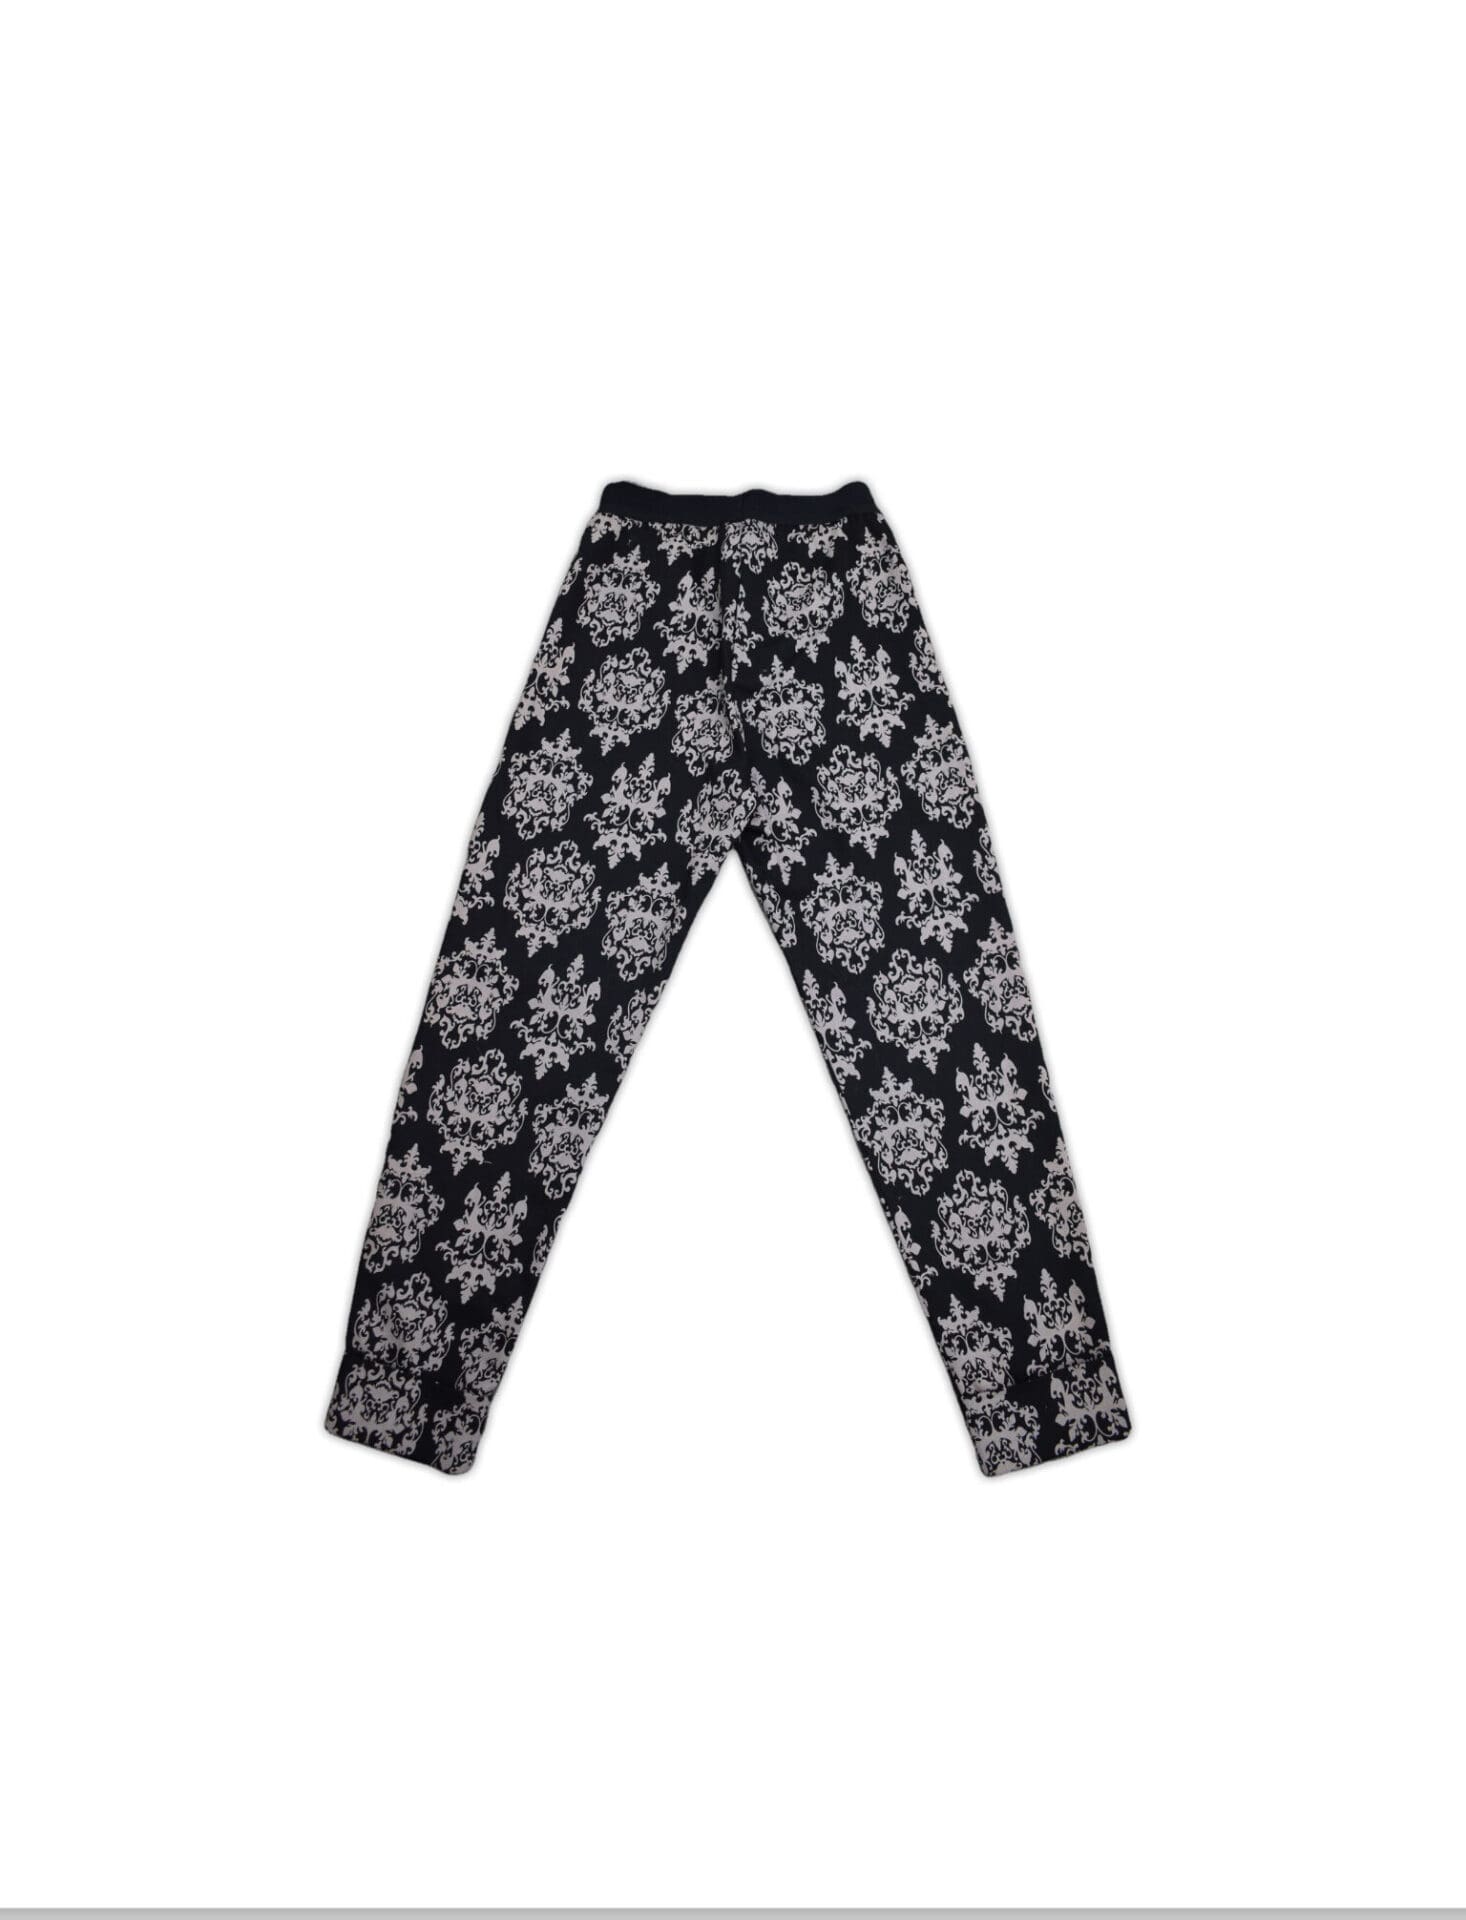 Comfortable, pull on jegging pant with cuffed hem, elastic waist, XS, black and beige print.